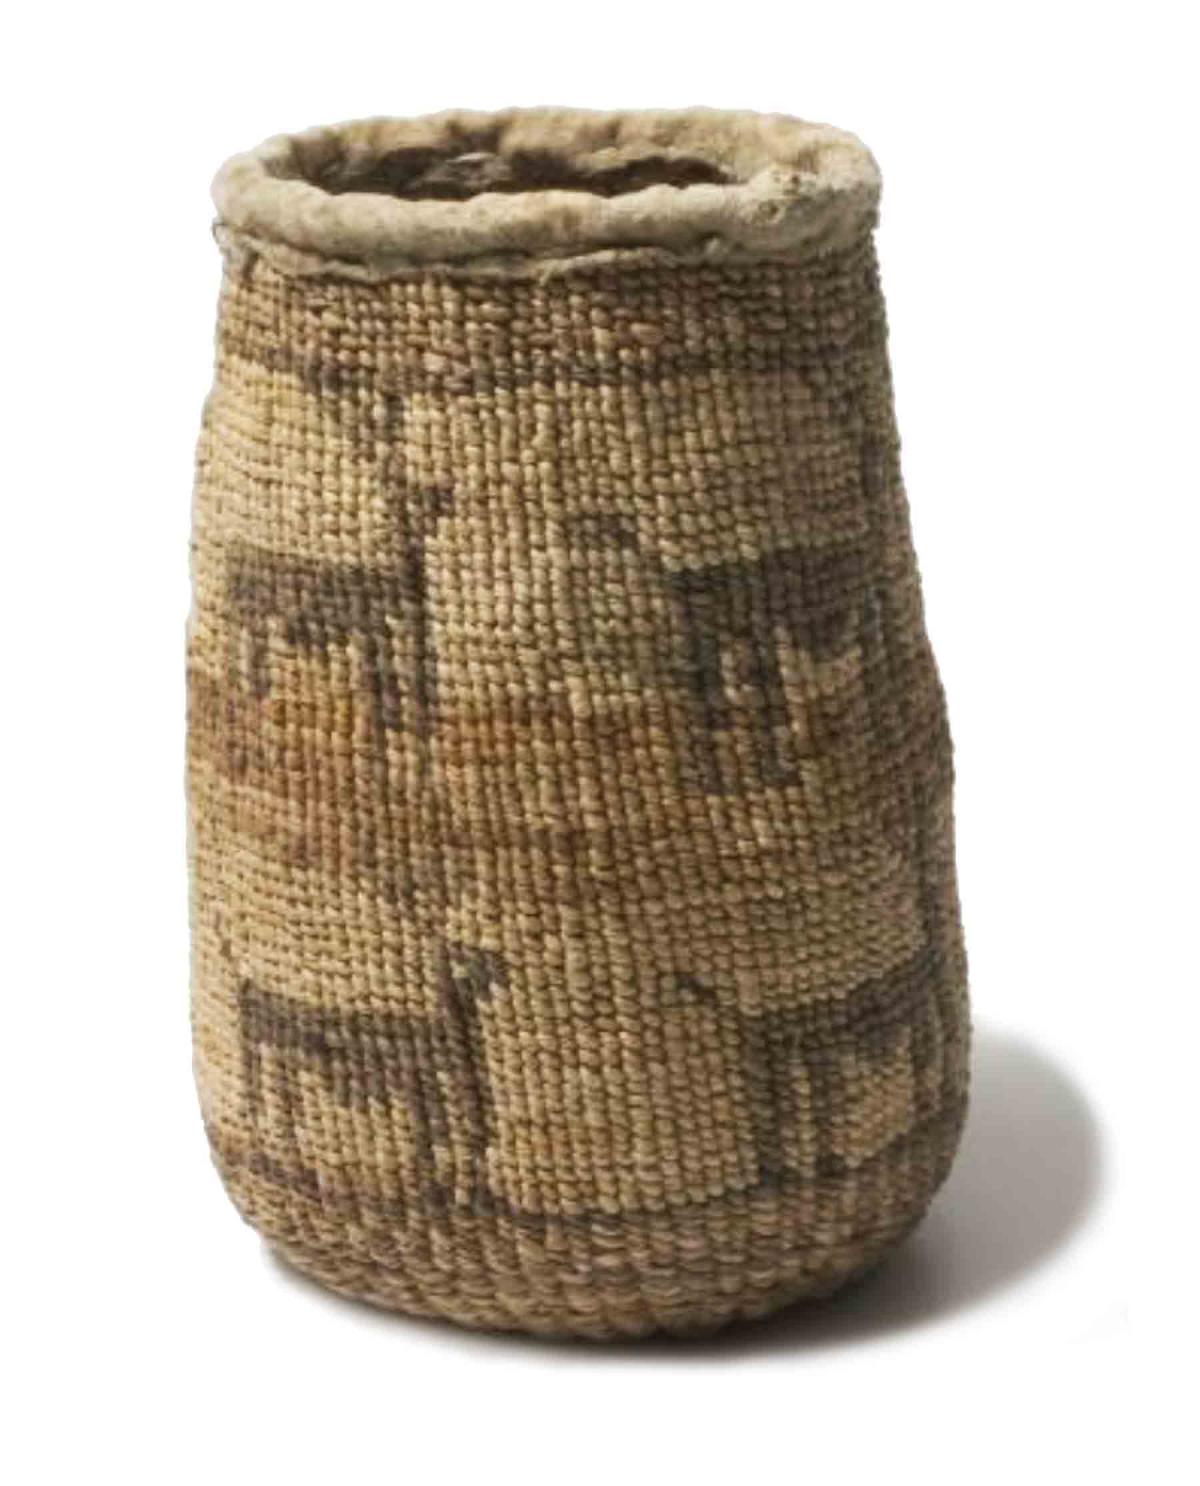 a woven bag or basket for gathering roots